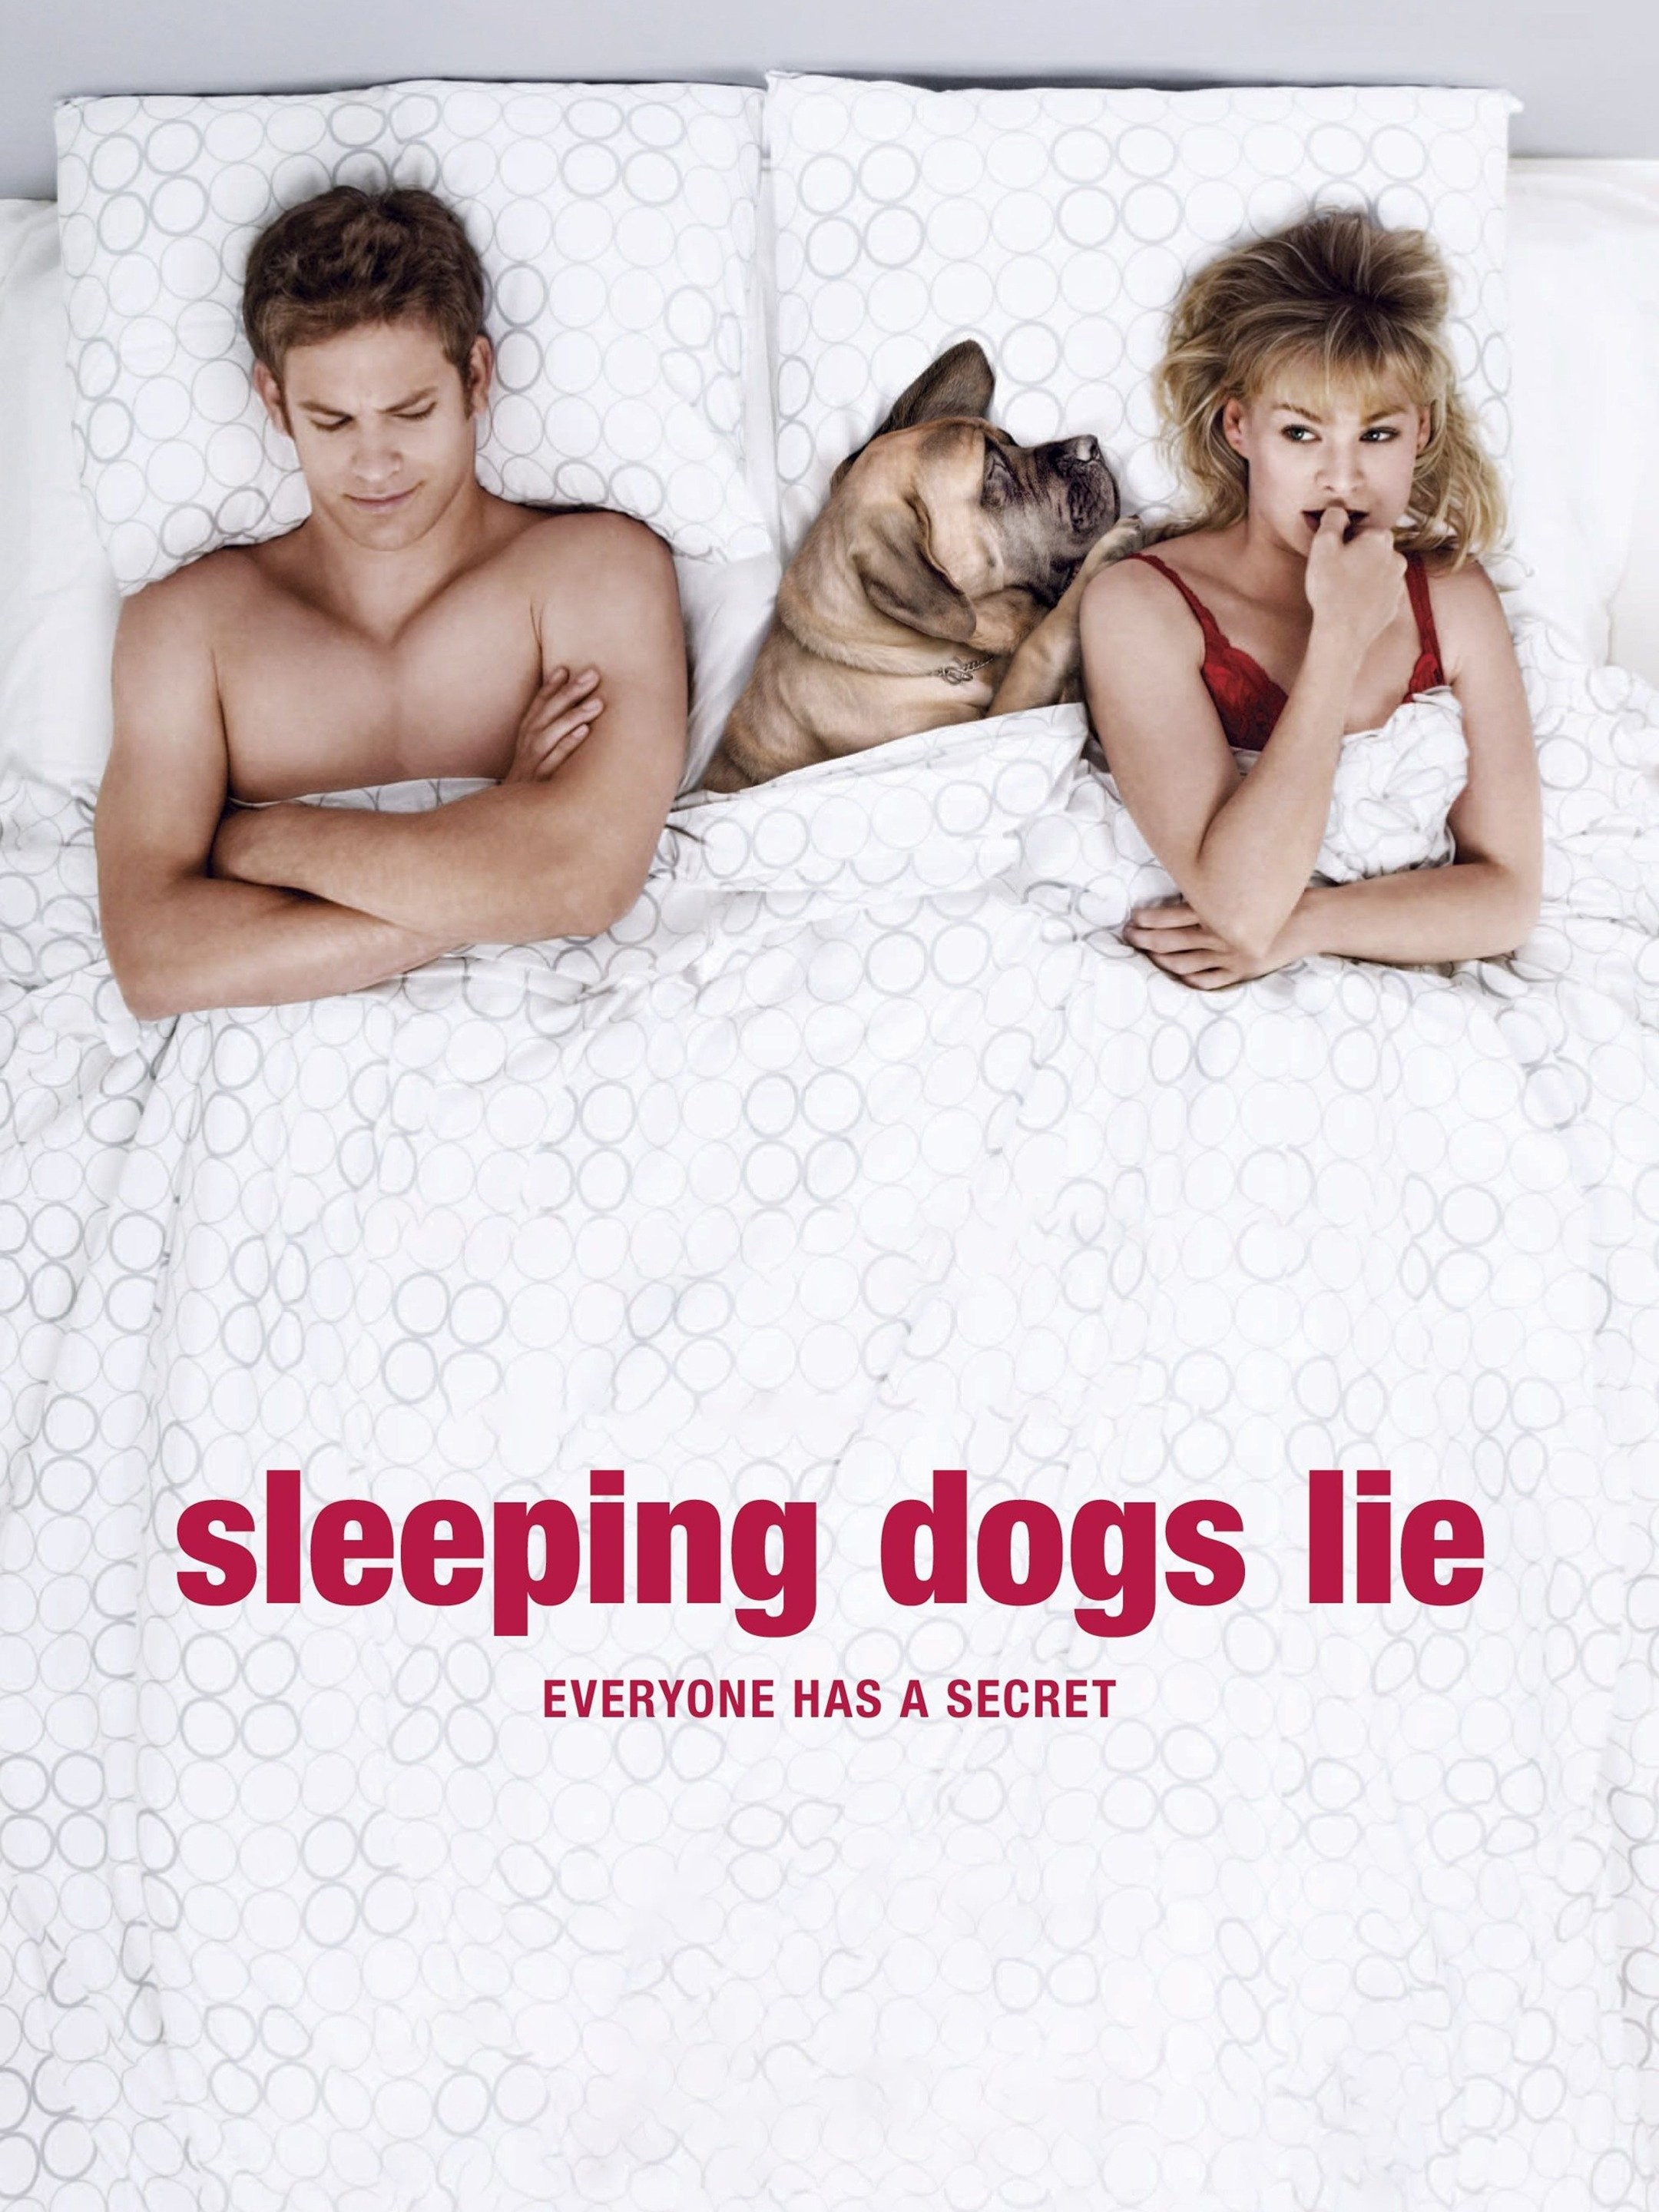 Ticket - Let Sleeping Dogs Lie, Releases